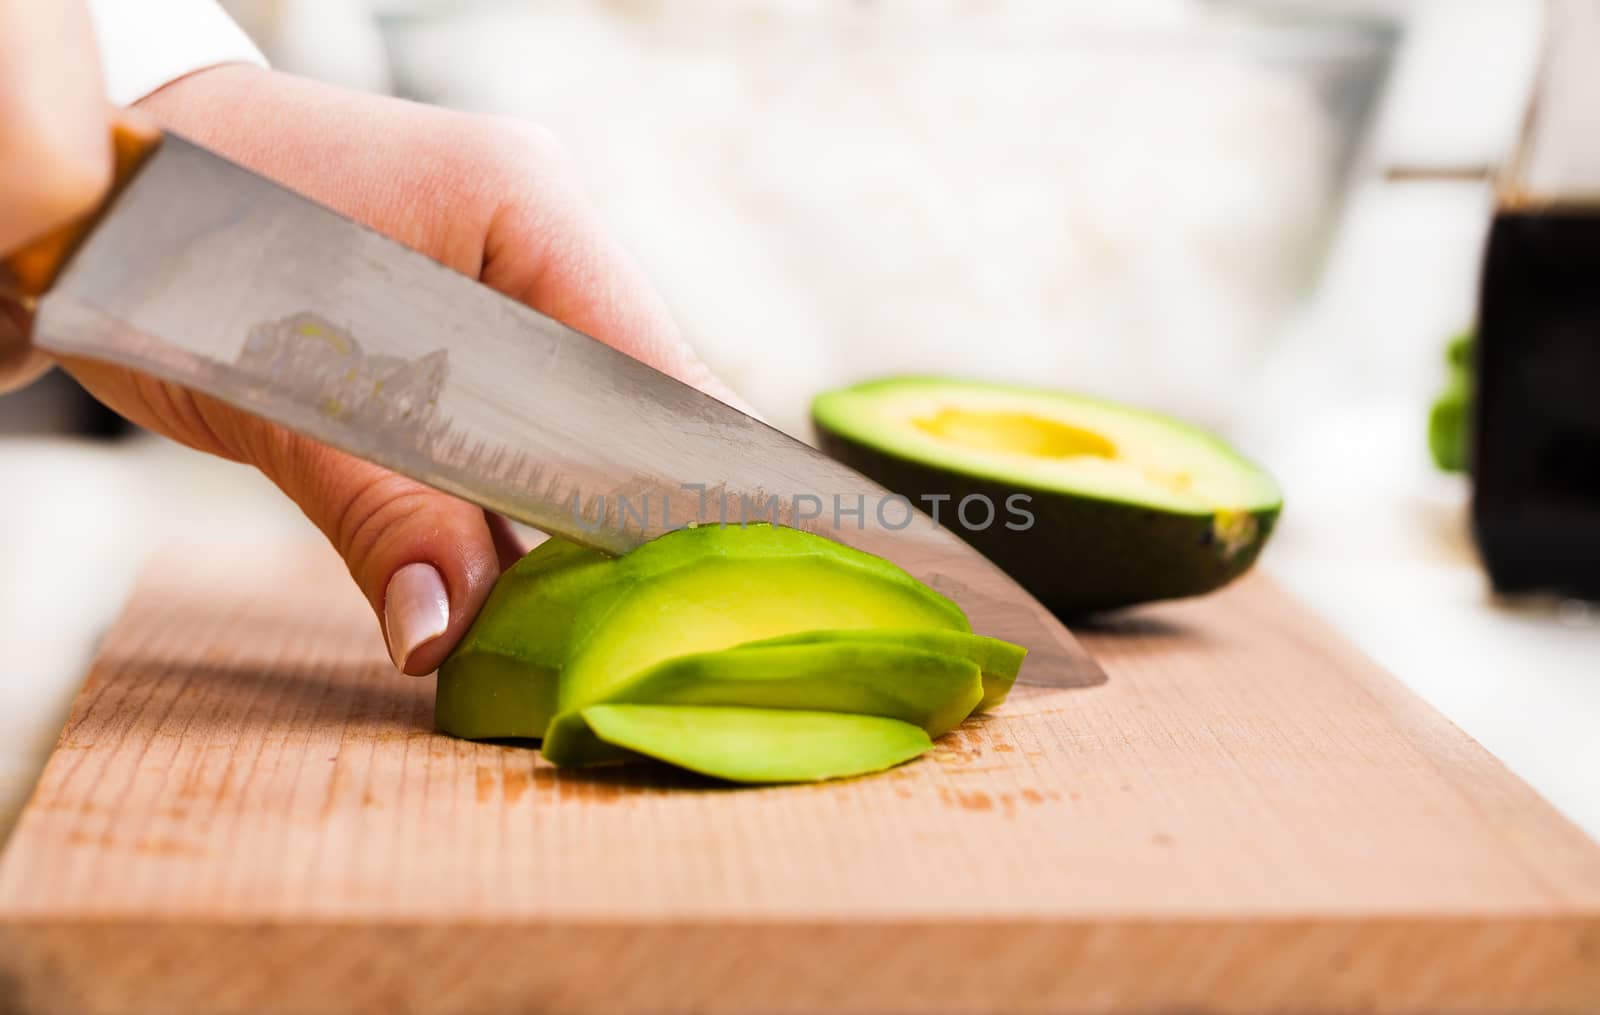 chef slicing the avocado close-up on a wooden board